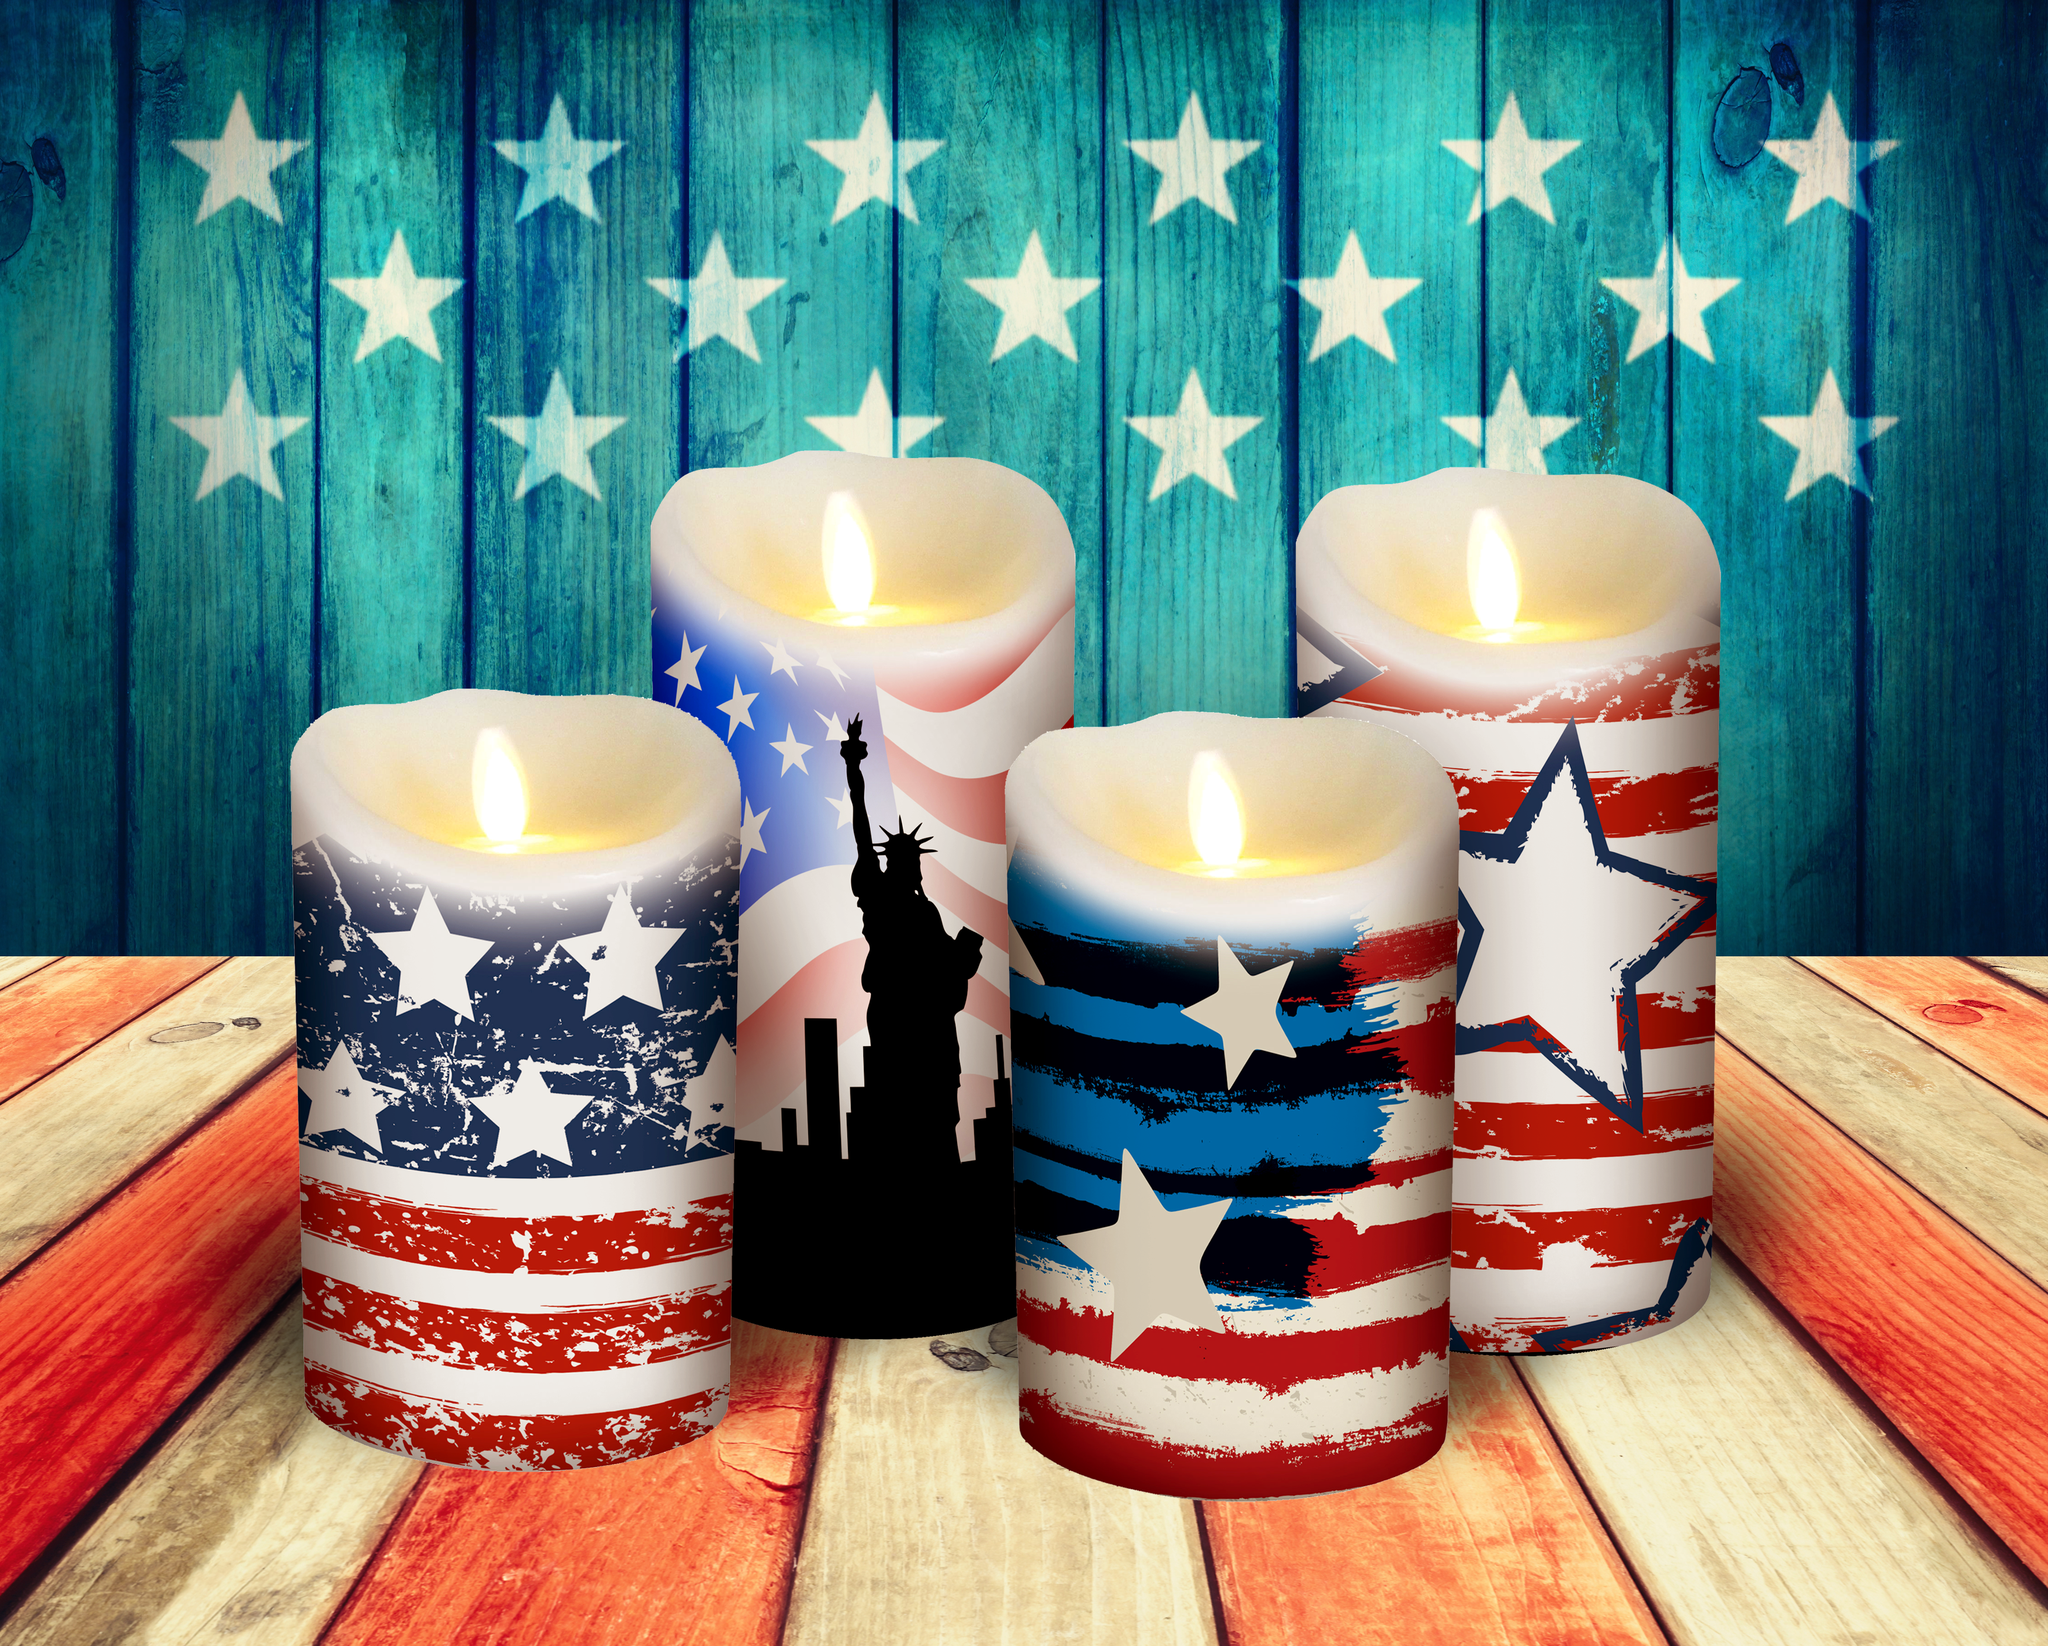 It's our Flameless Decor launch party! Just in time for the 4th!